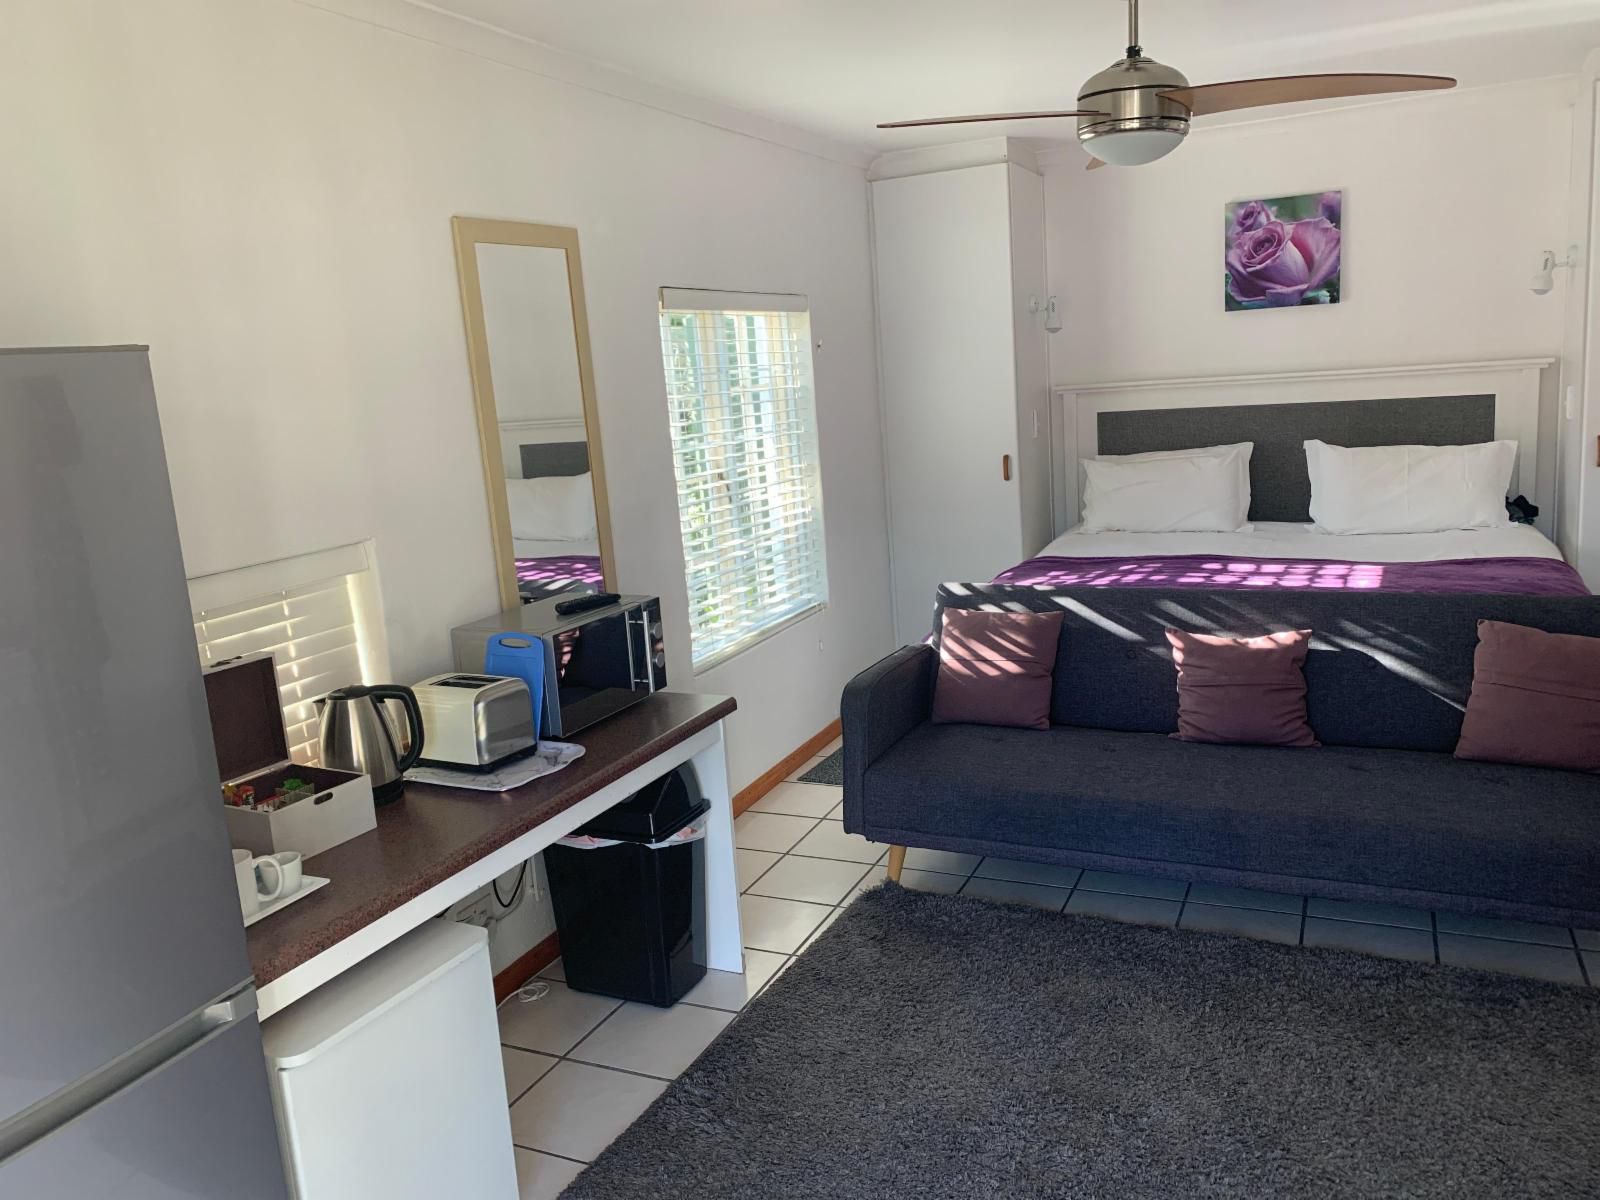 Howard S End Manor Pinelands Cape Town Western Cape South Africa Bedroom